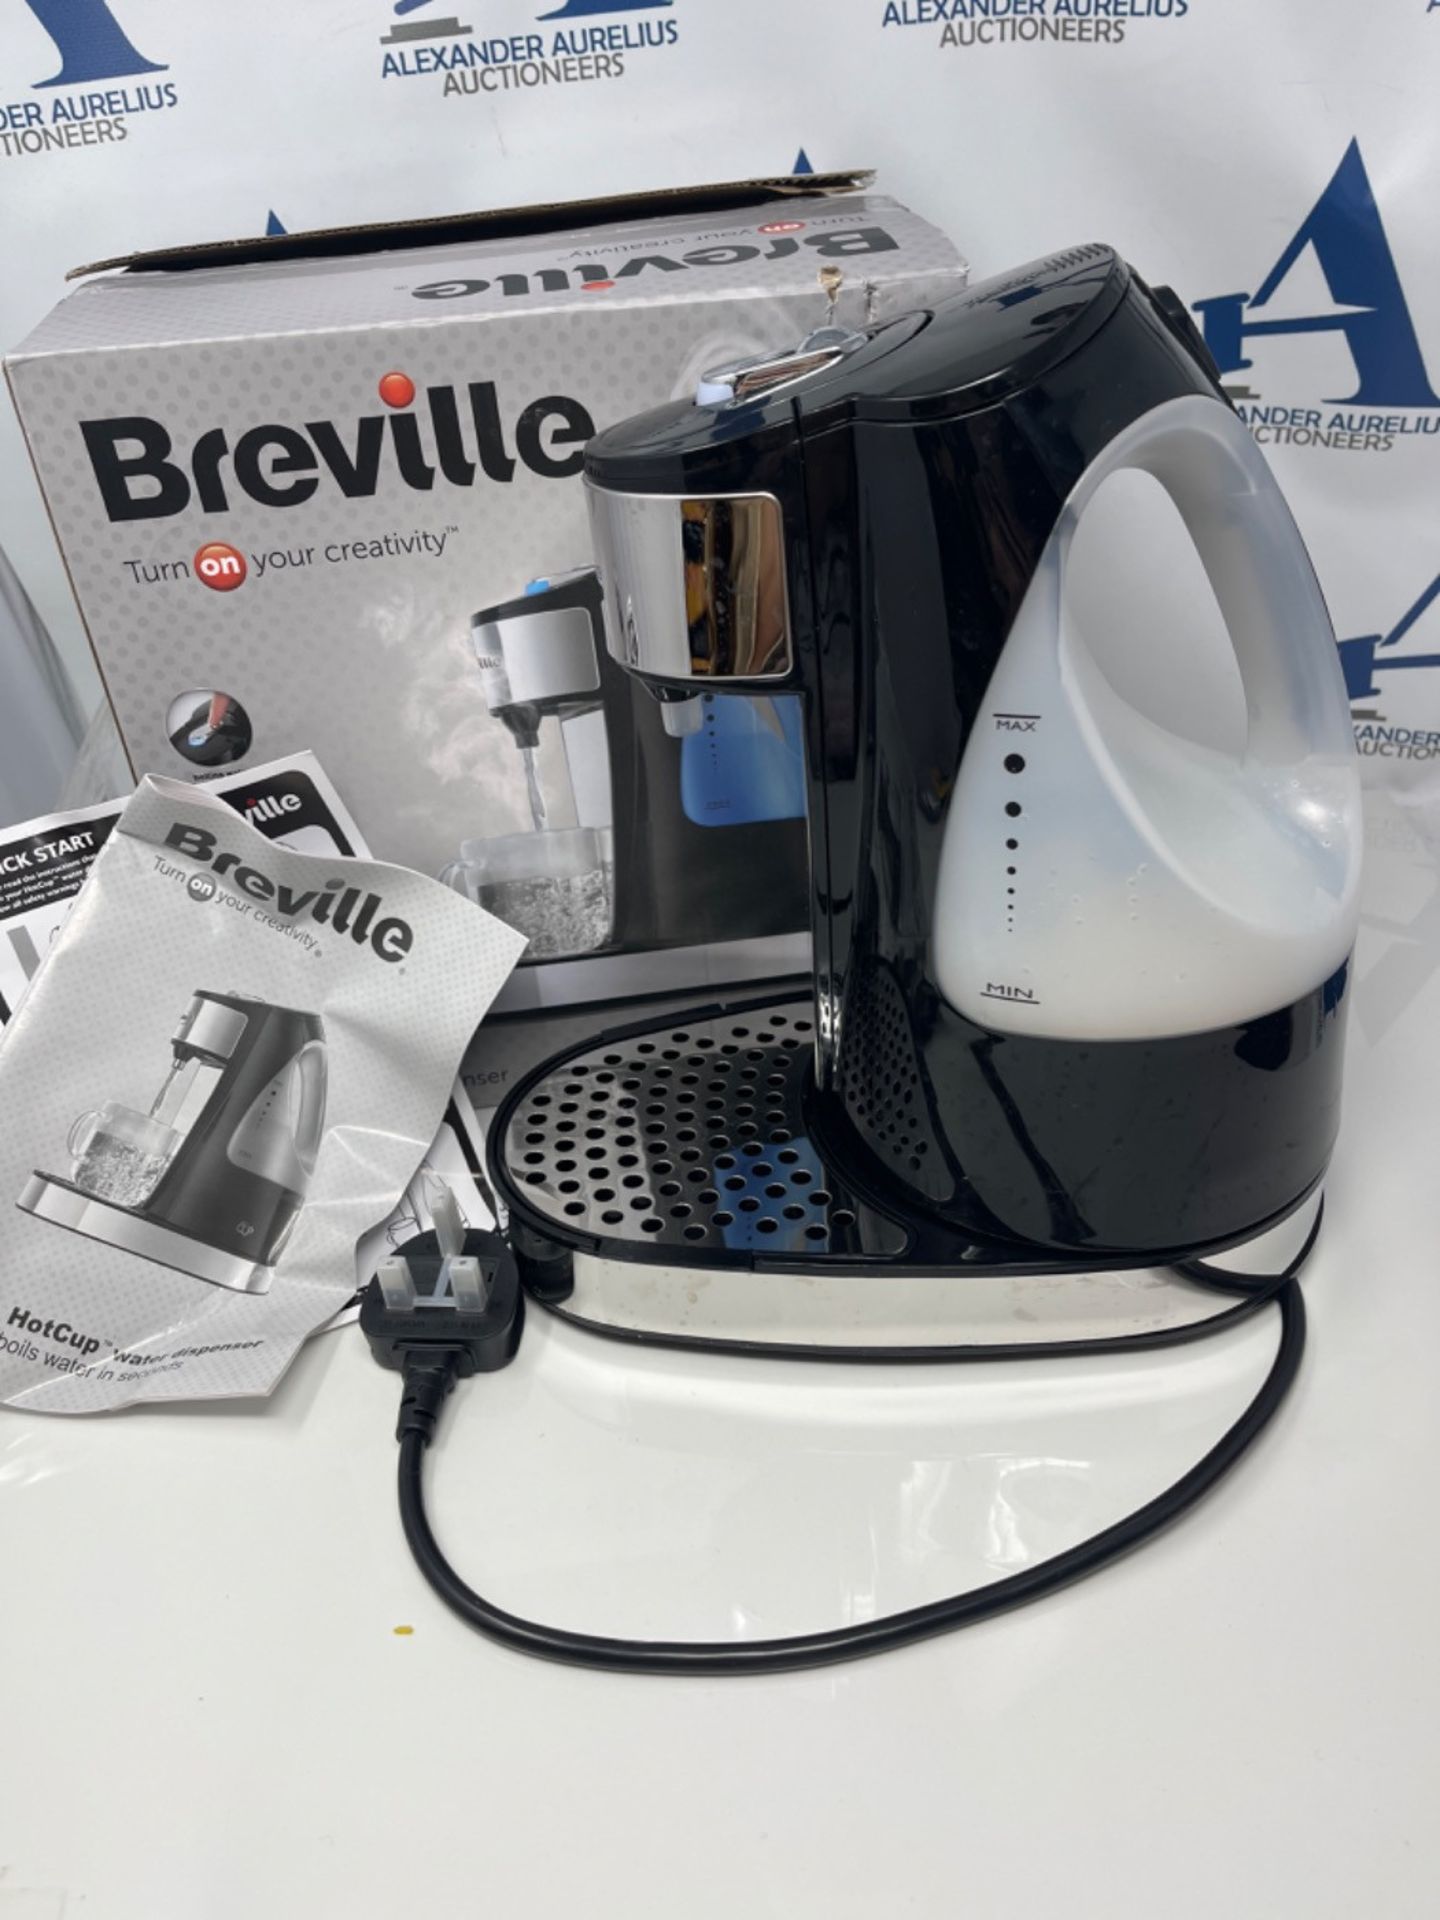 Breville HotCup Hot Water Dispenser | 3kW Fast Boil |1.5L | Energy-Efficient | Gloss B - Image 2 of 3